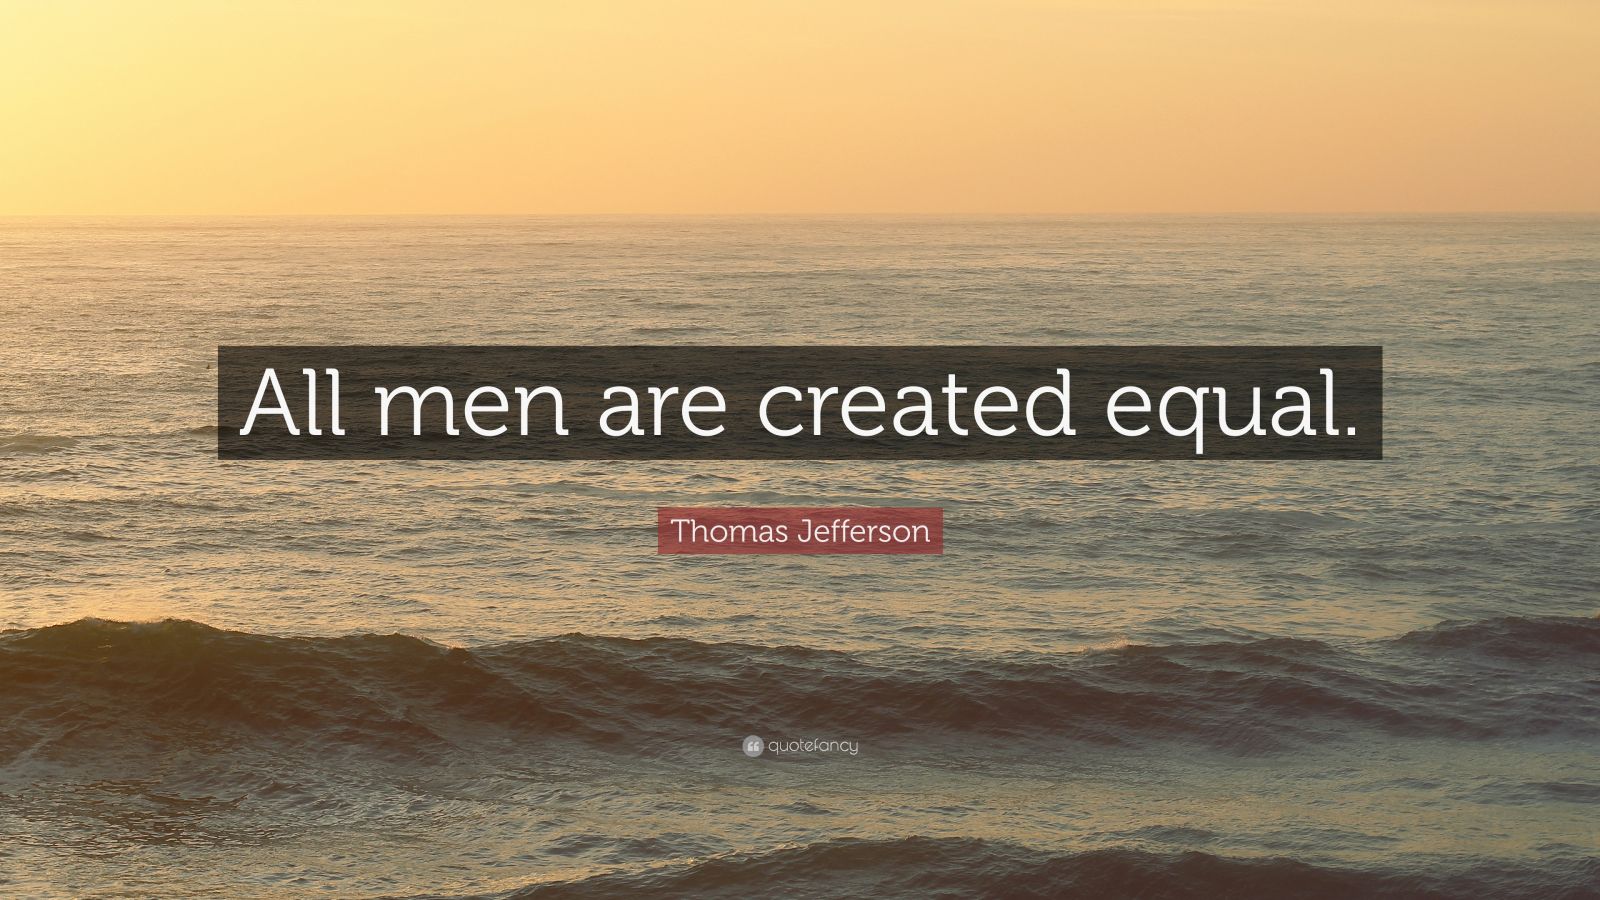 Thomas Jefferson Quote: “All men are created equal.” (10 wallpapers